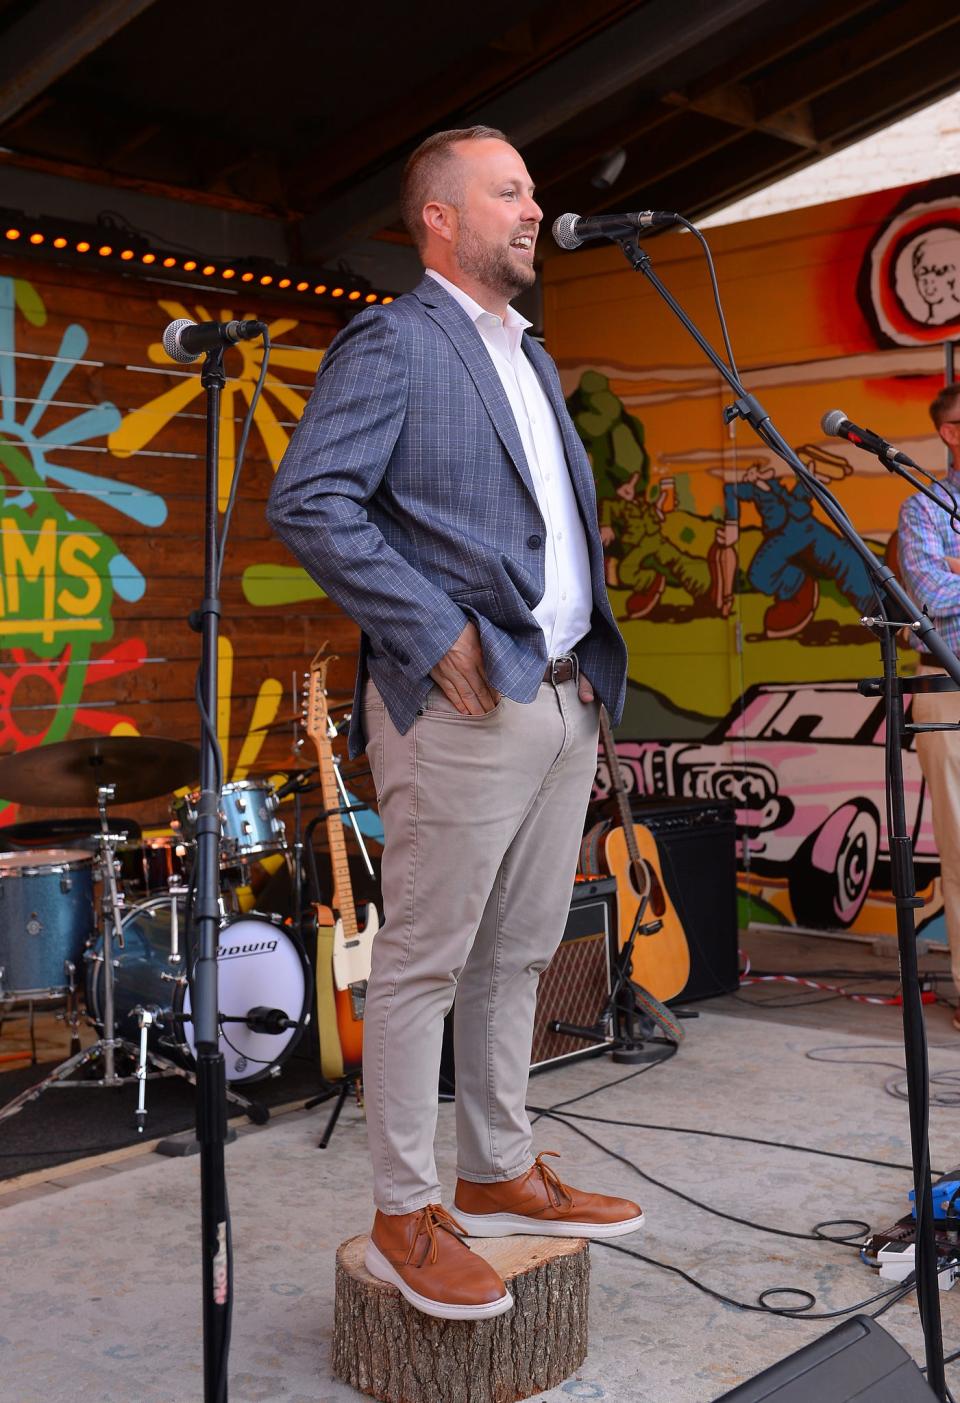 Candidates running for the upcoming state and local primary election speak during the Stump the Yard event held at FR8yard in downtown Spartanburg, Monday evening, June 6, 2022. Jeffrey A. Horton Jr., Spartanburg County Council - District 5, speaks during the event.